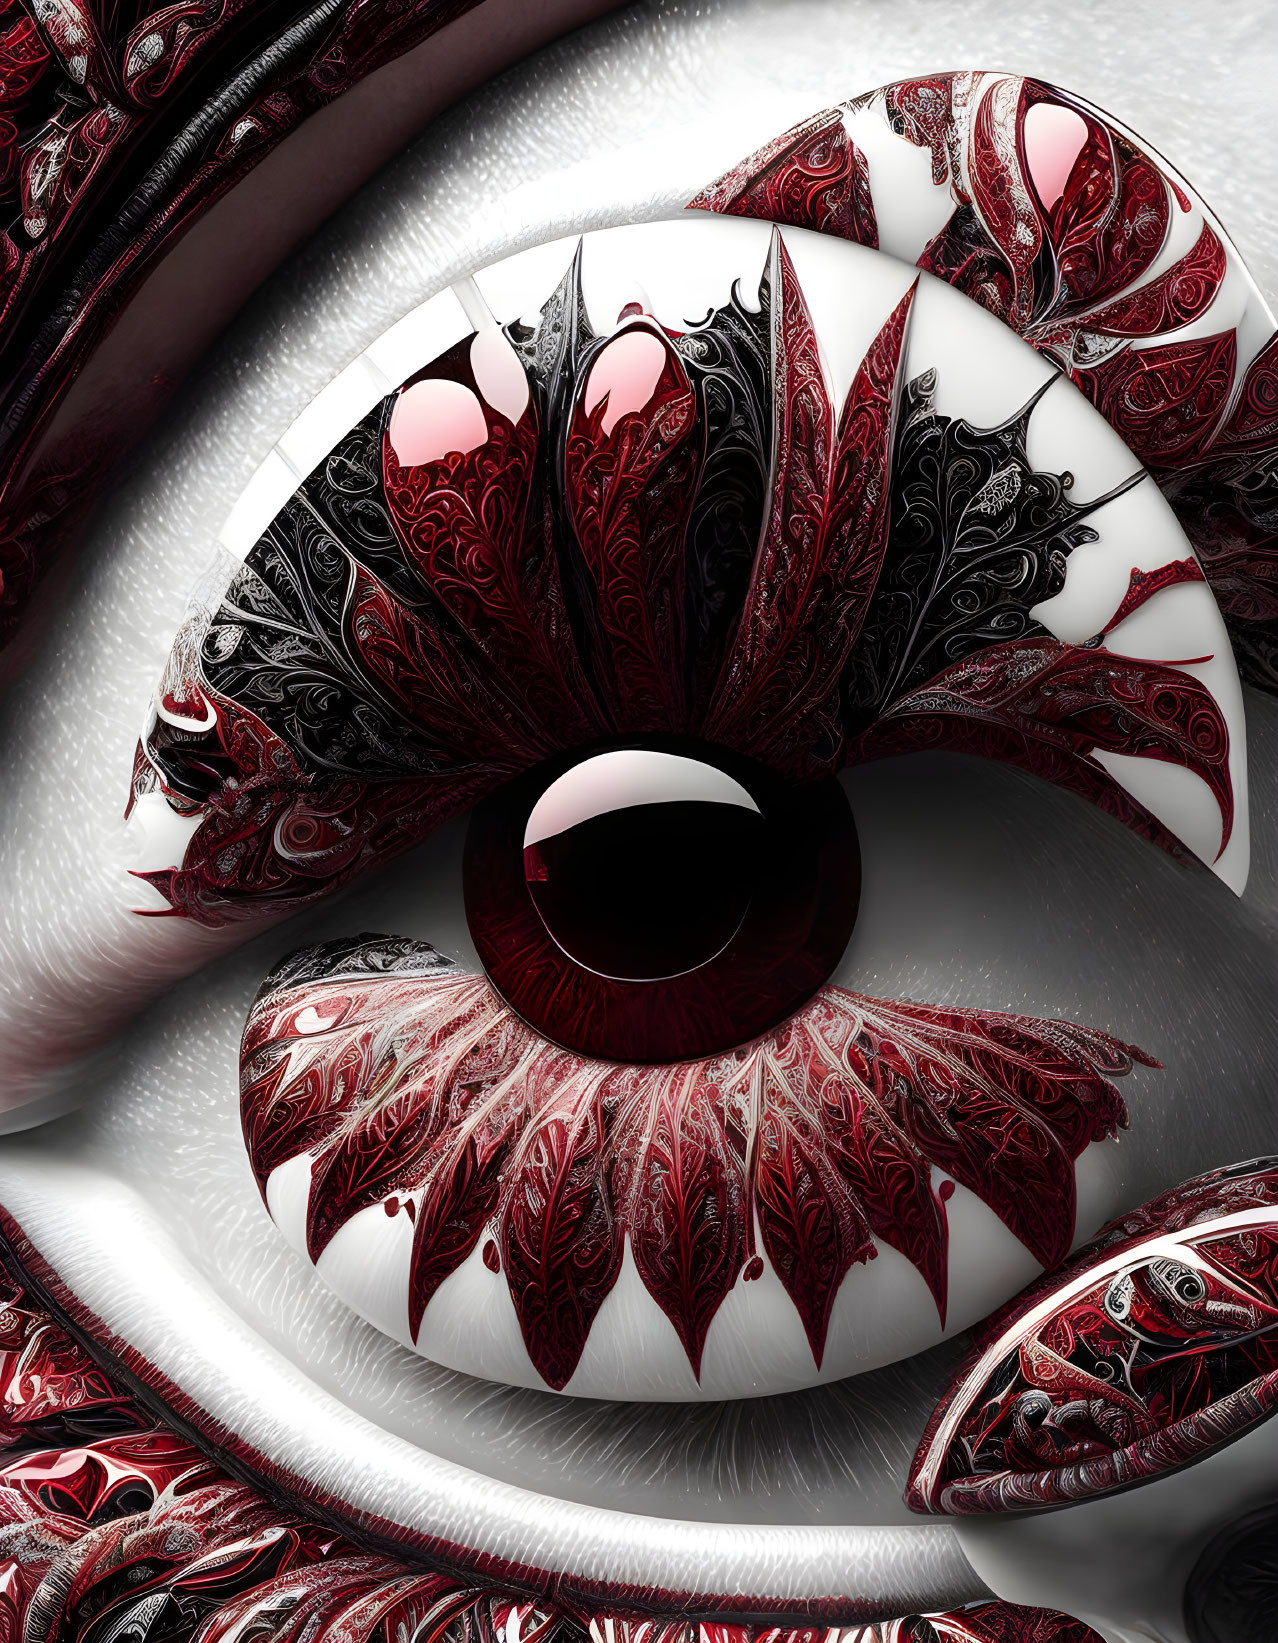 Fractal Pattern Eye Image in Red, Black, and White